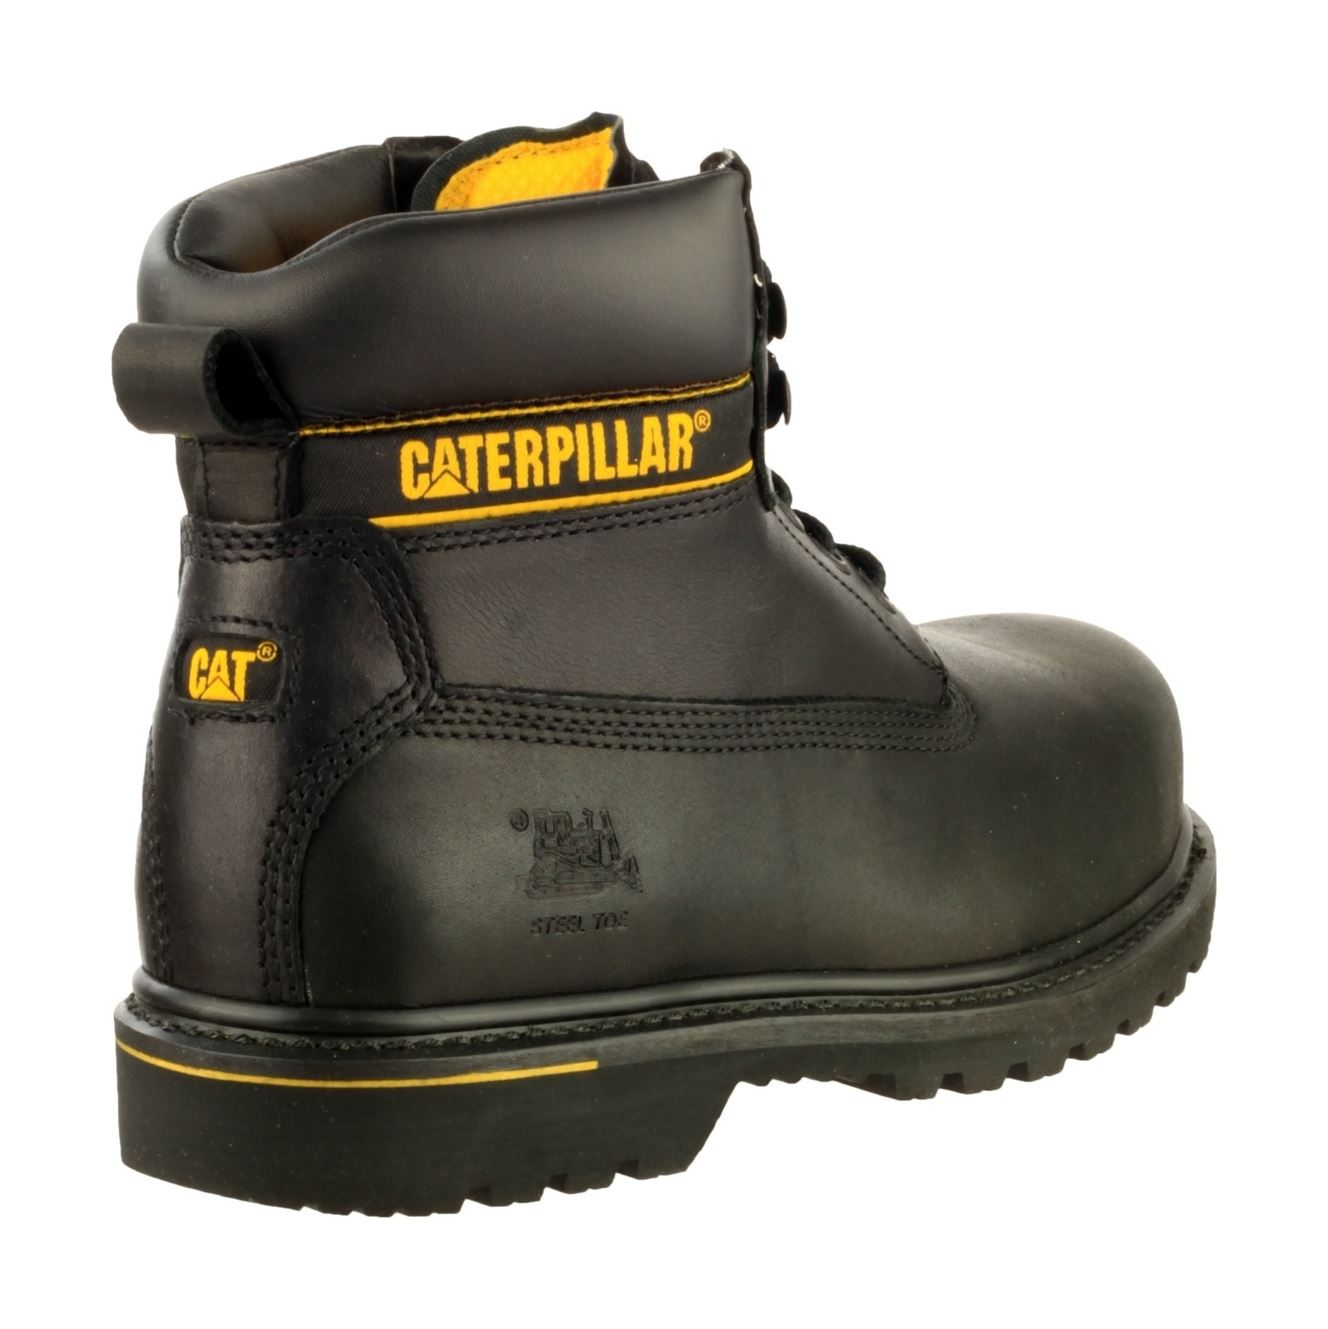 safety boots caterpillar-mens-holton-s3-safety-boots-textile-leather- VGSWILD